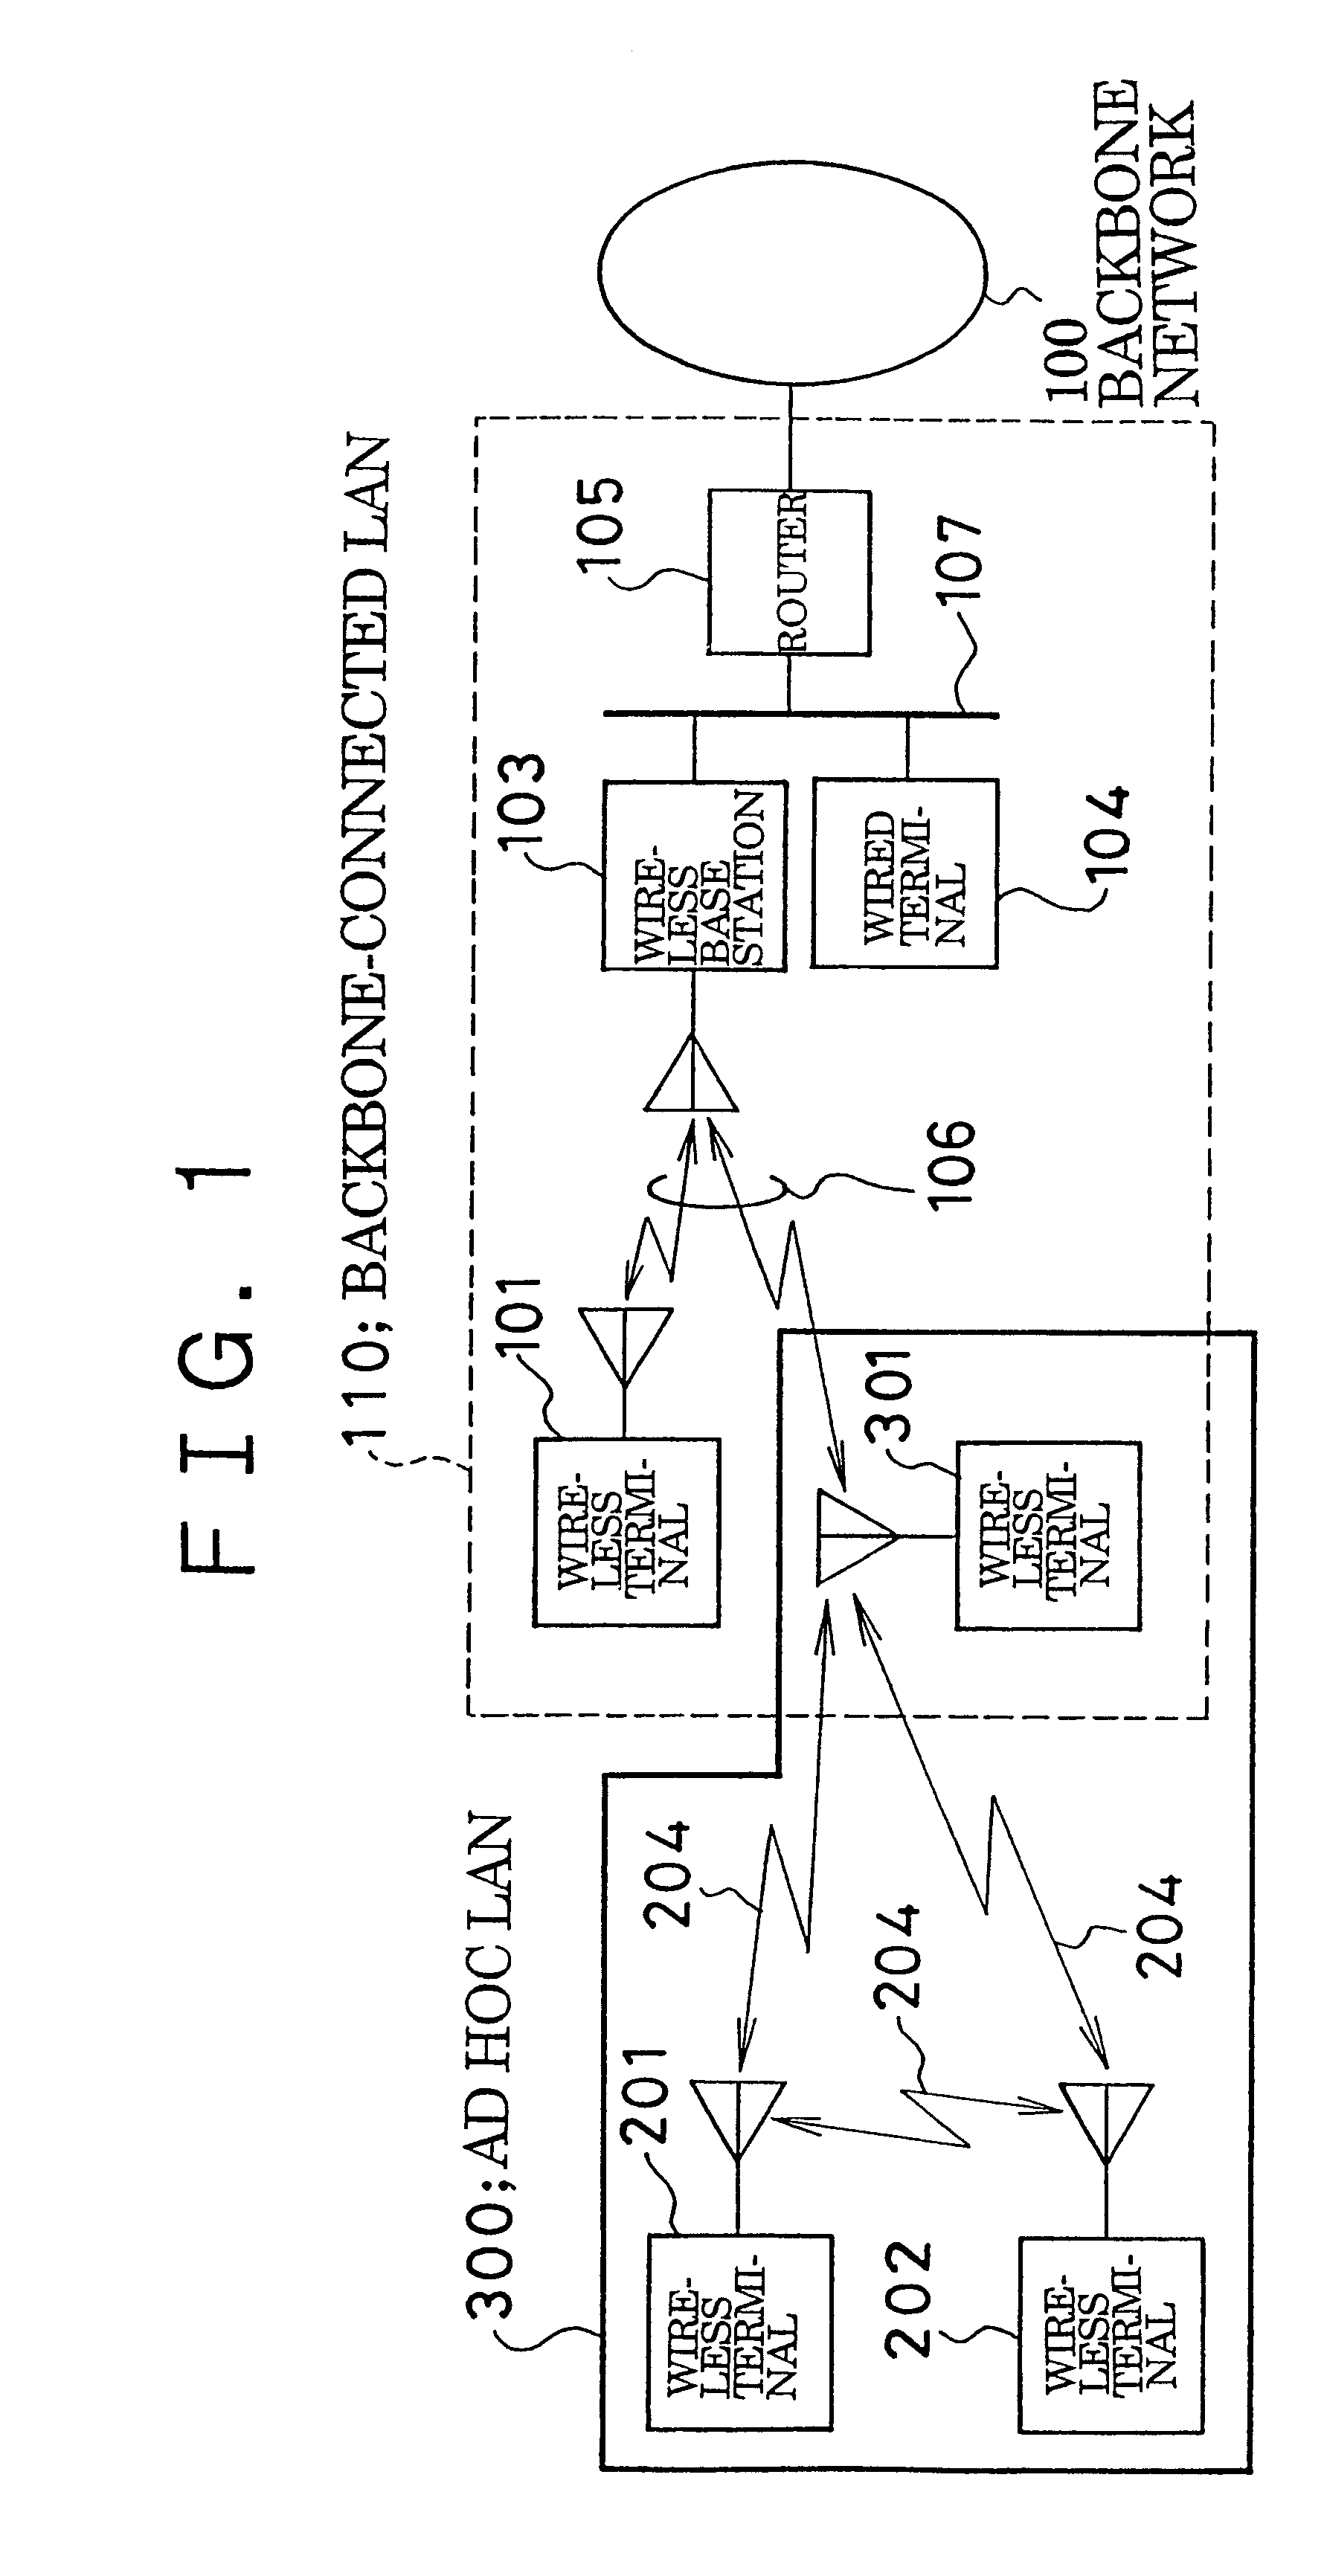 Method of setting up AD HOC local area network, method of communicating using said network, and terminal for use with said network